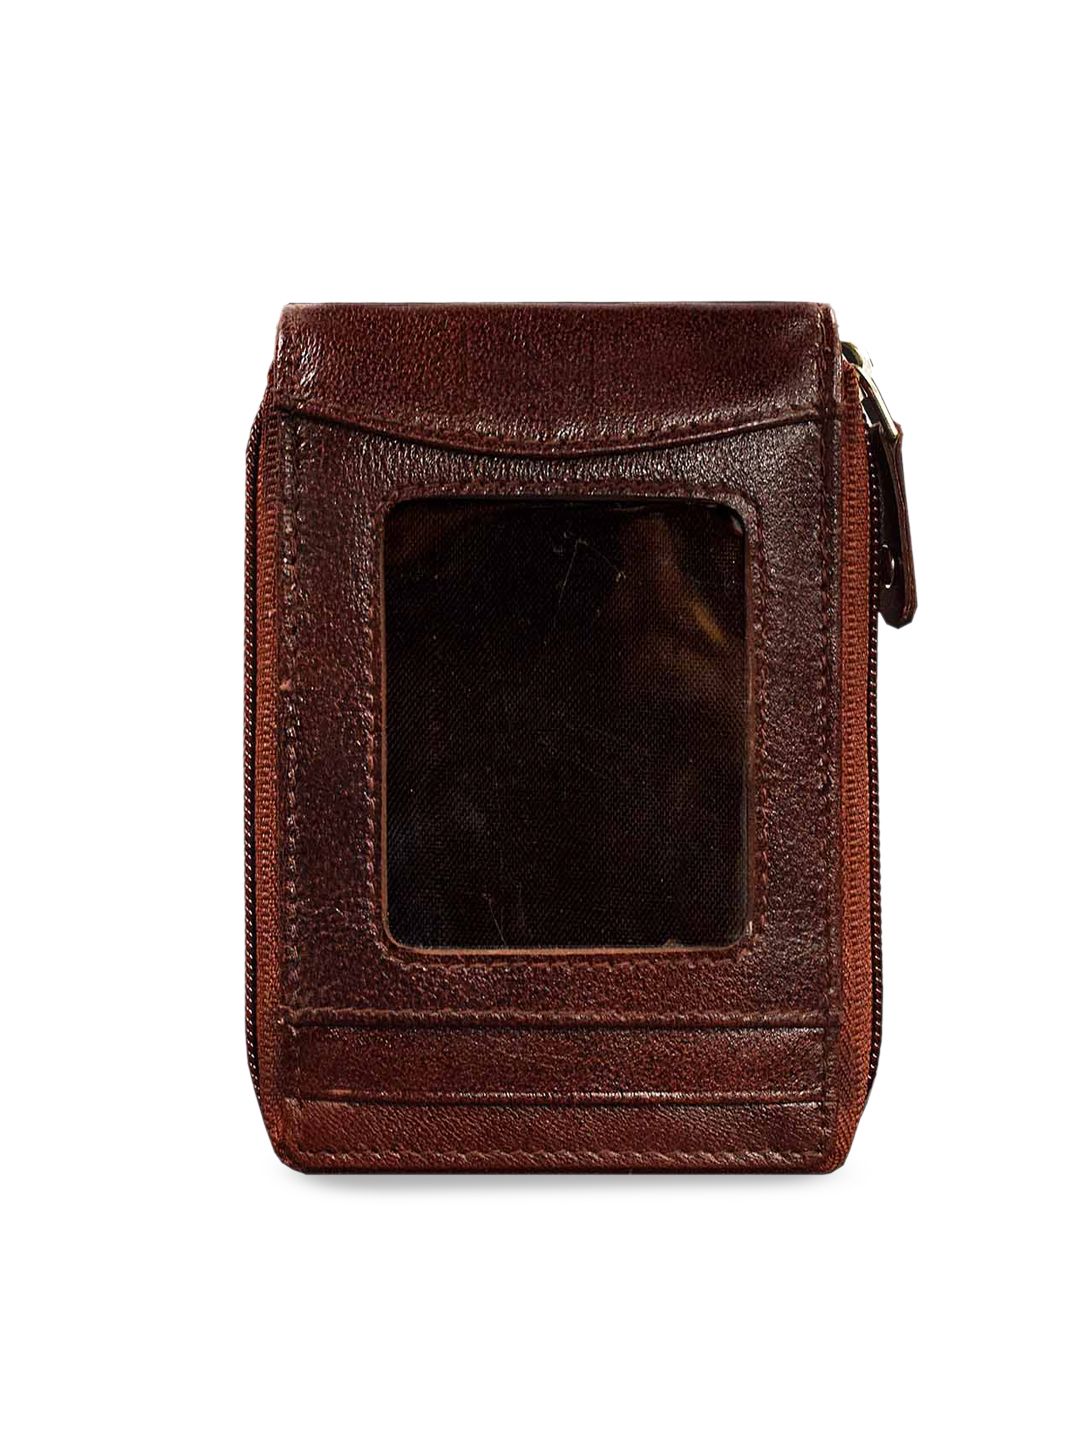 ABYS Unisex Brown Solid Genuine Leather Card Holder Price in India